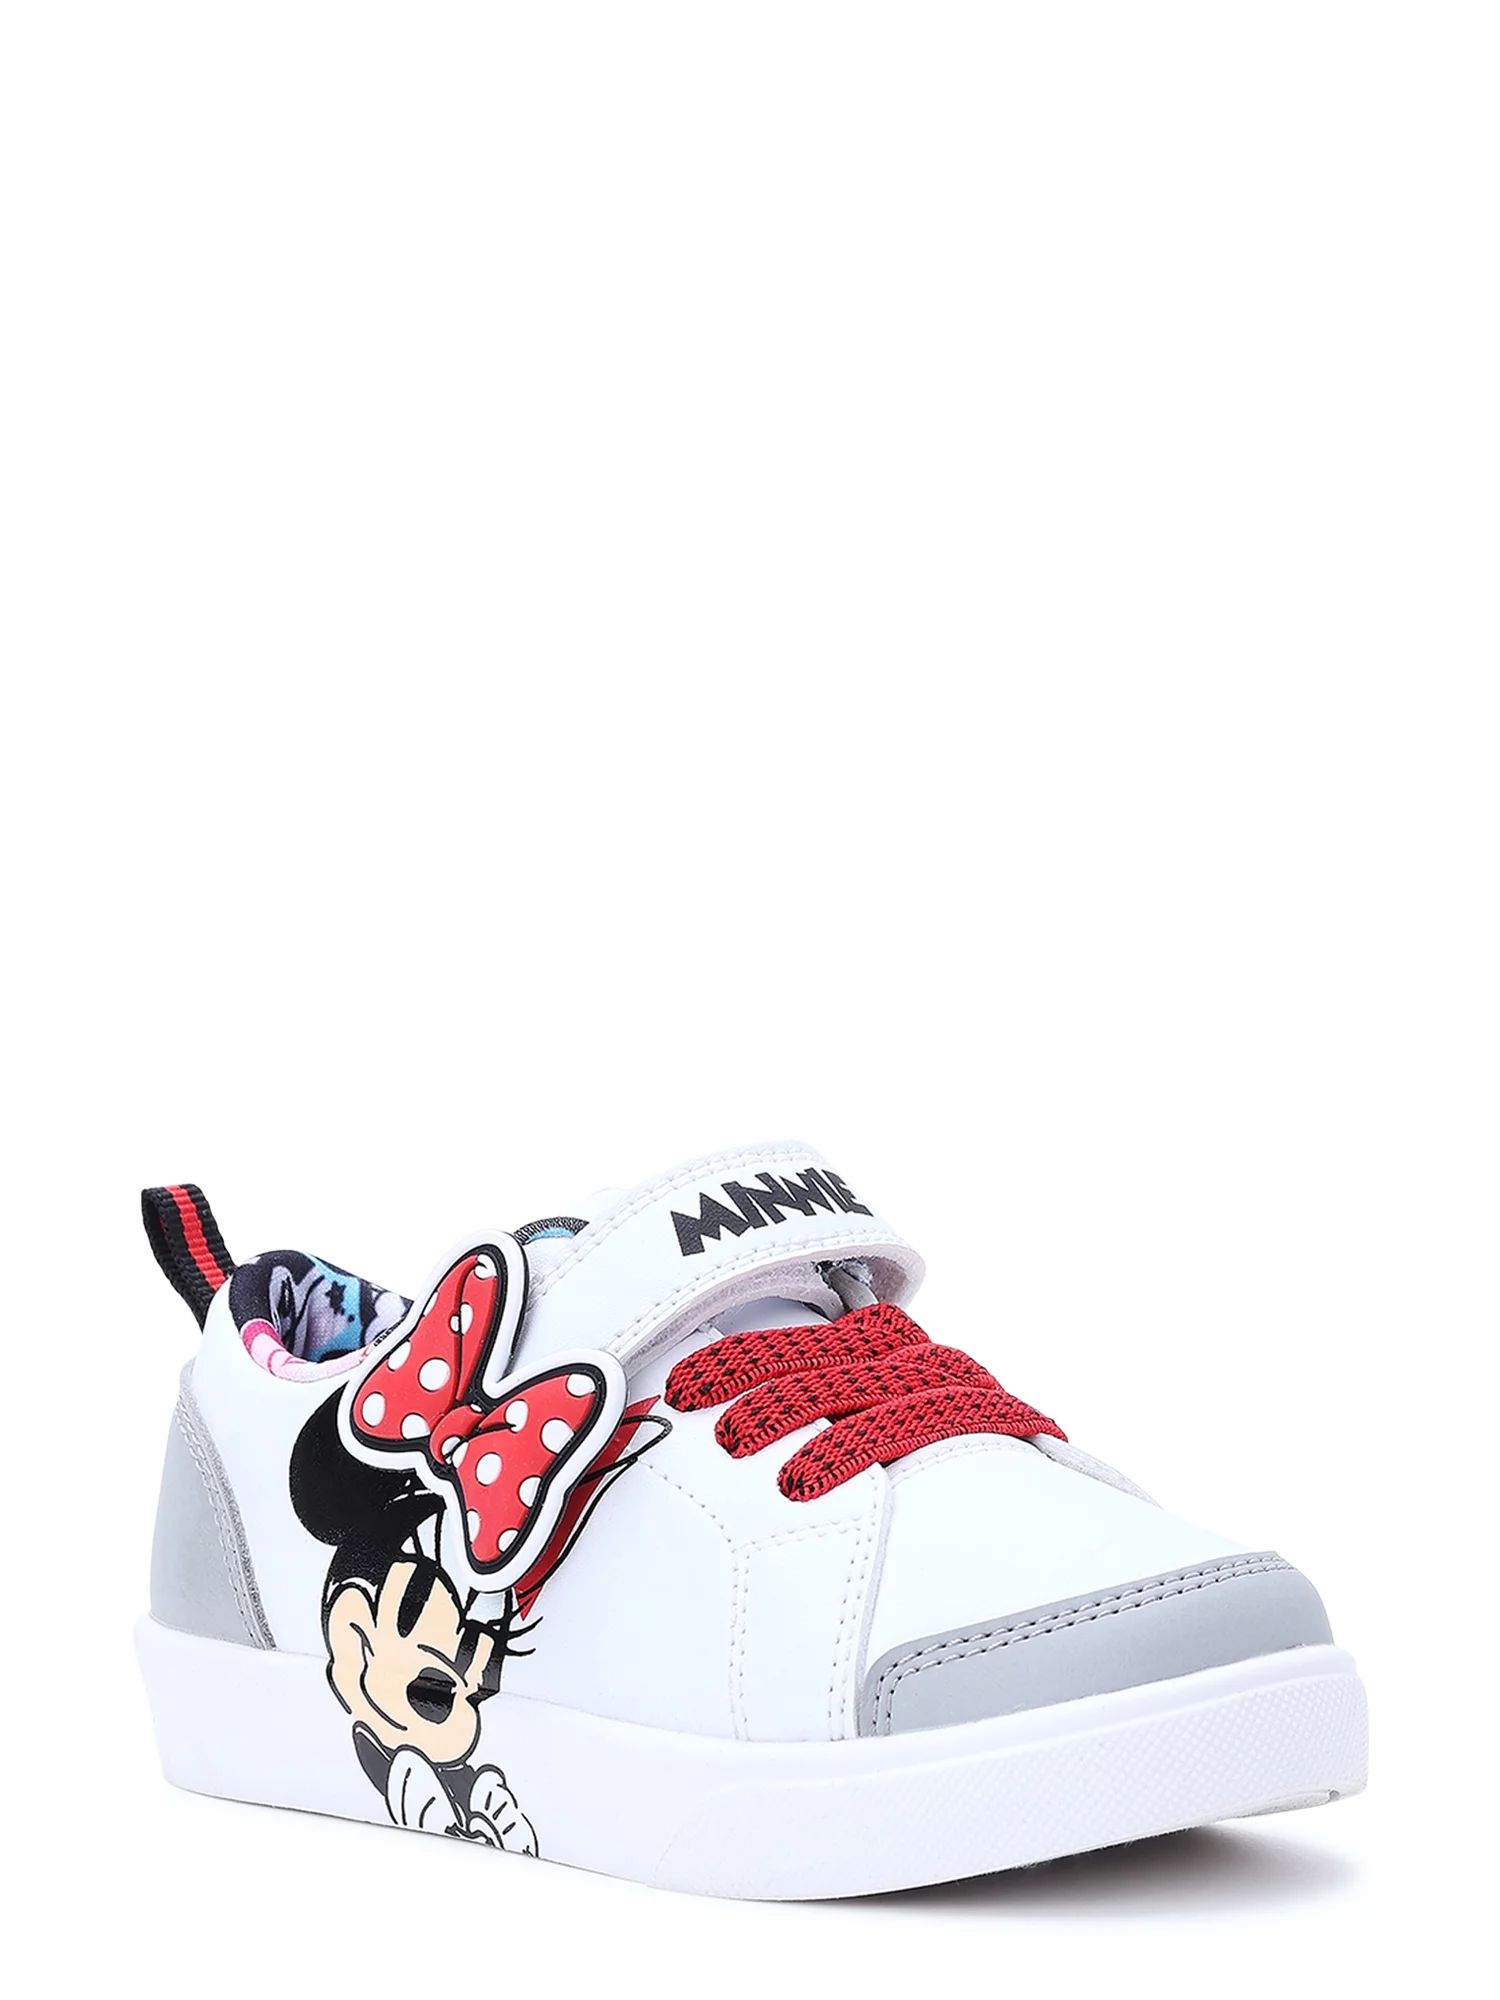 Disney Classic Minnie Mouse Toddler Girl Low Court Sneaker, Sizes 7-12 | Walmart (US)